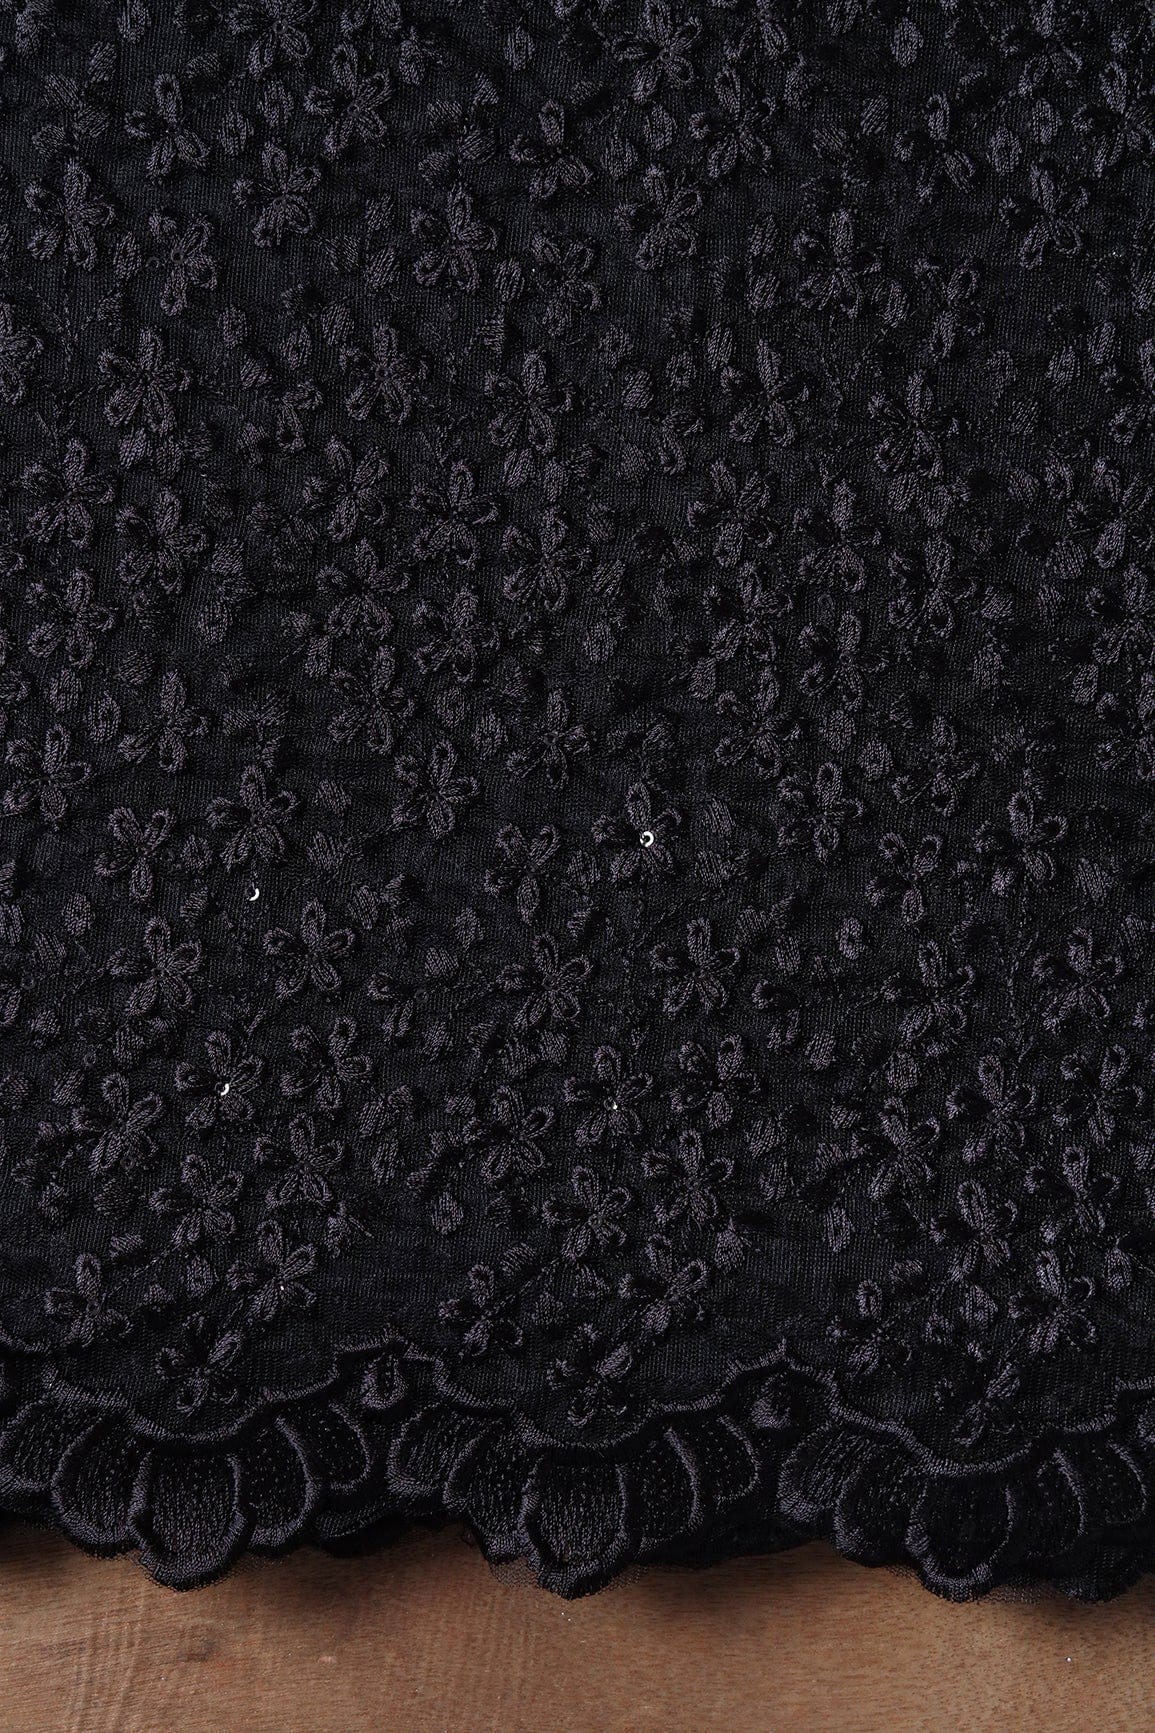 doeraa Embroidery Fabrics Black Thread Heavy Floral Embroidery On Black Soft Net Fabric With Border